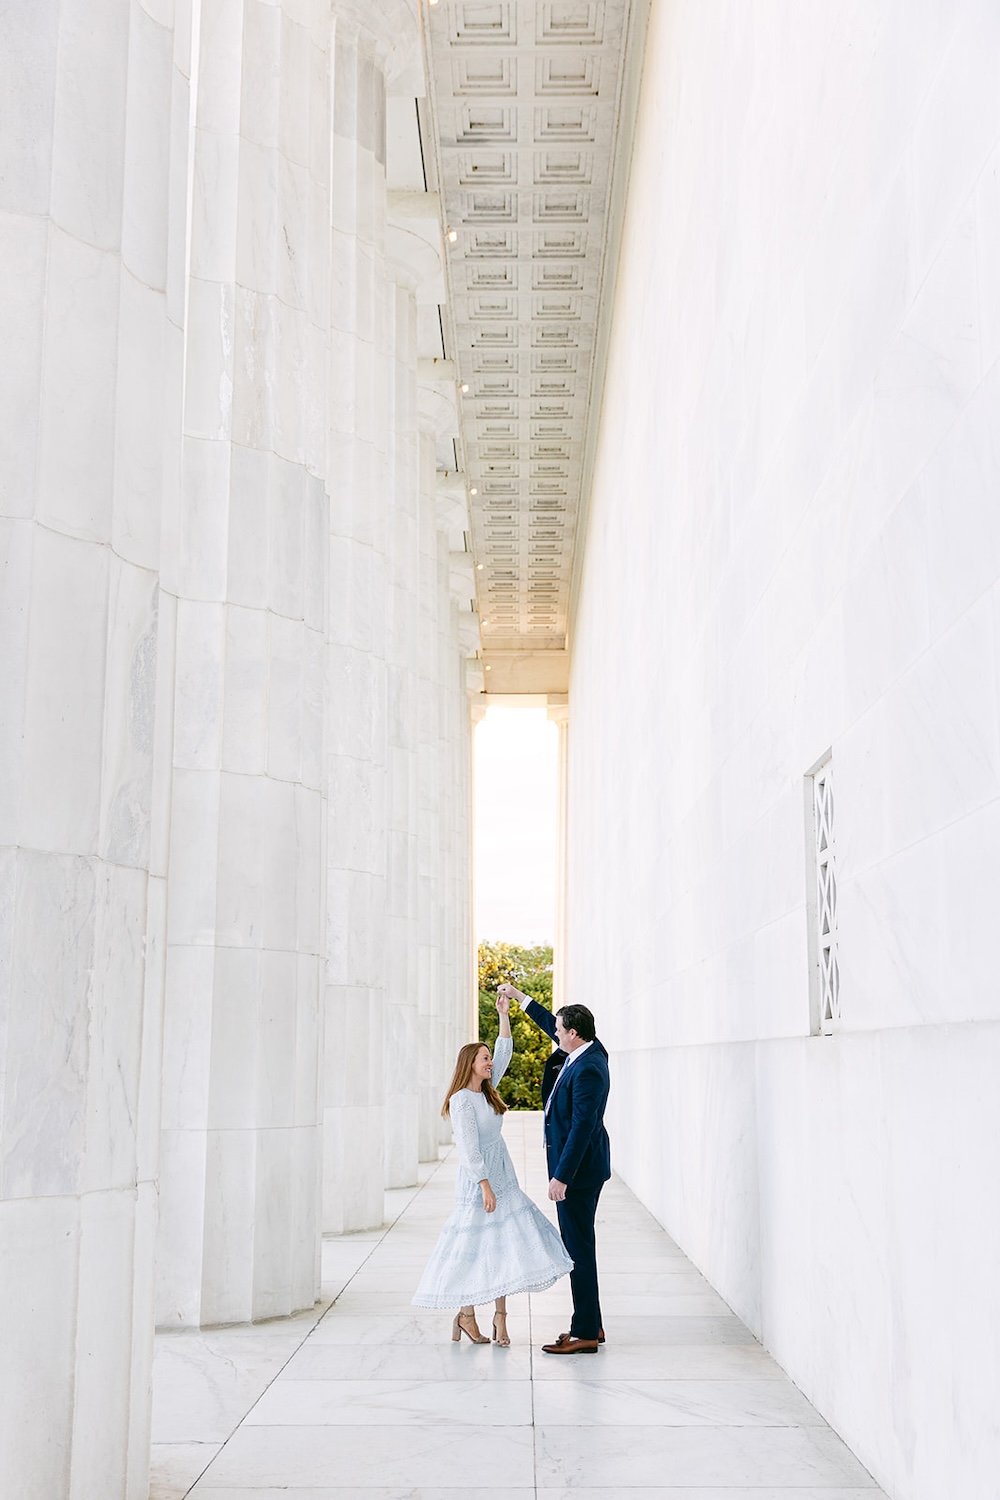 Engaged couple dances at the Lincoln Memorial in Washington DC. Spring wedding engagement photo session. Sarah Bradshaw Photography.